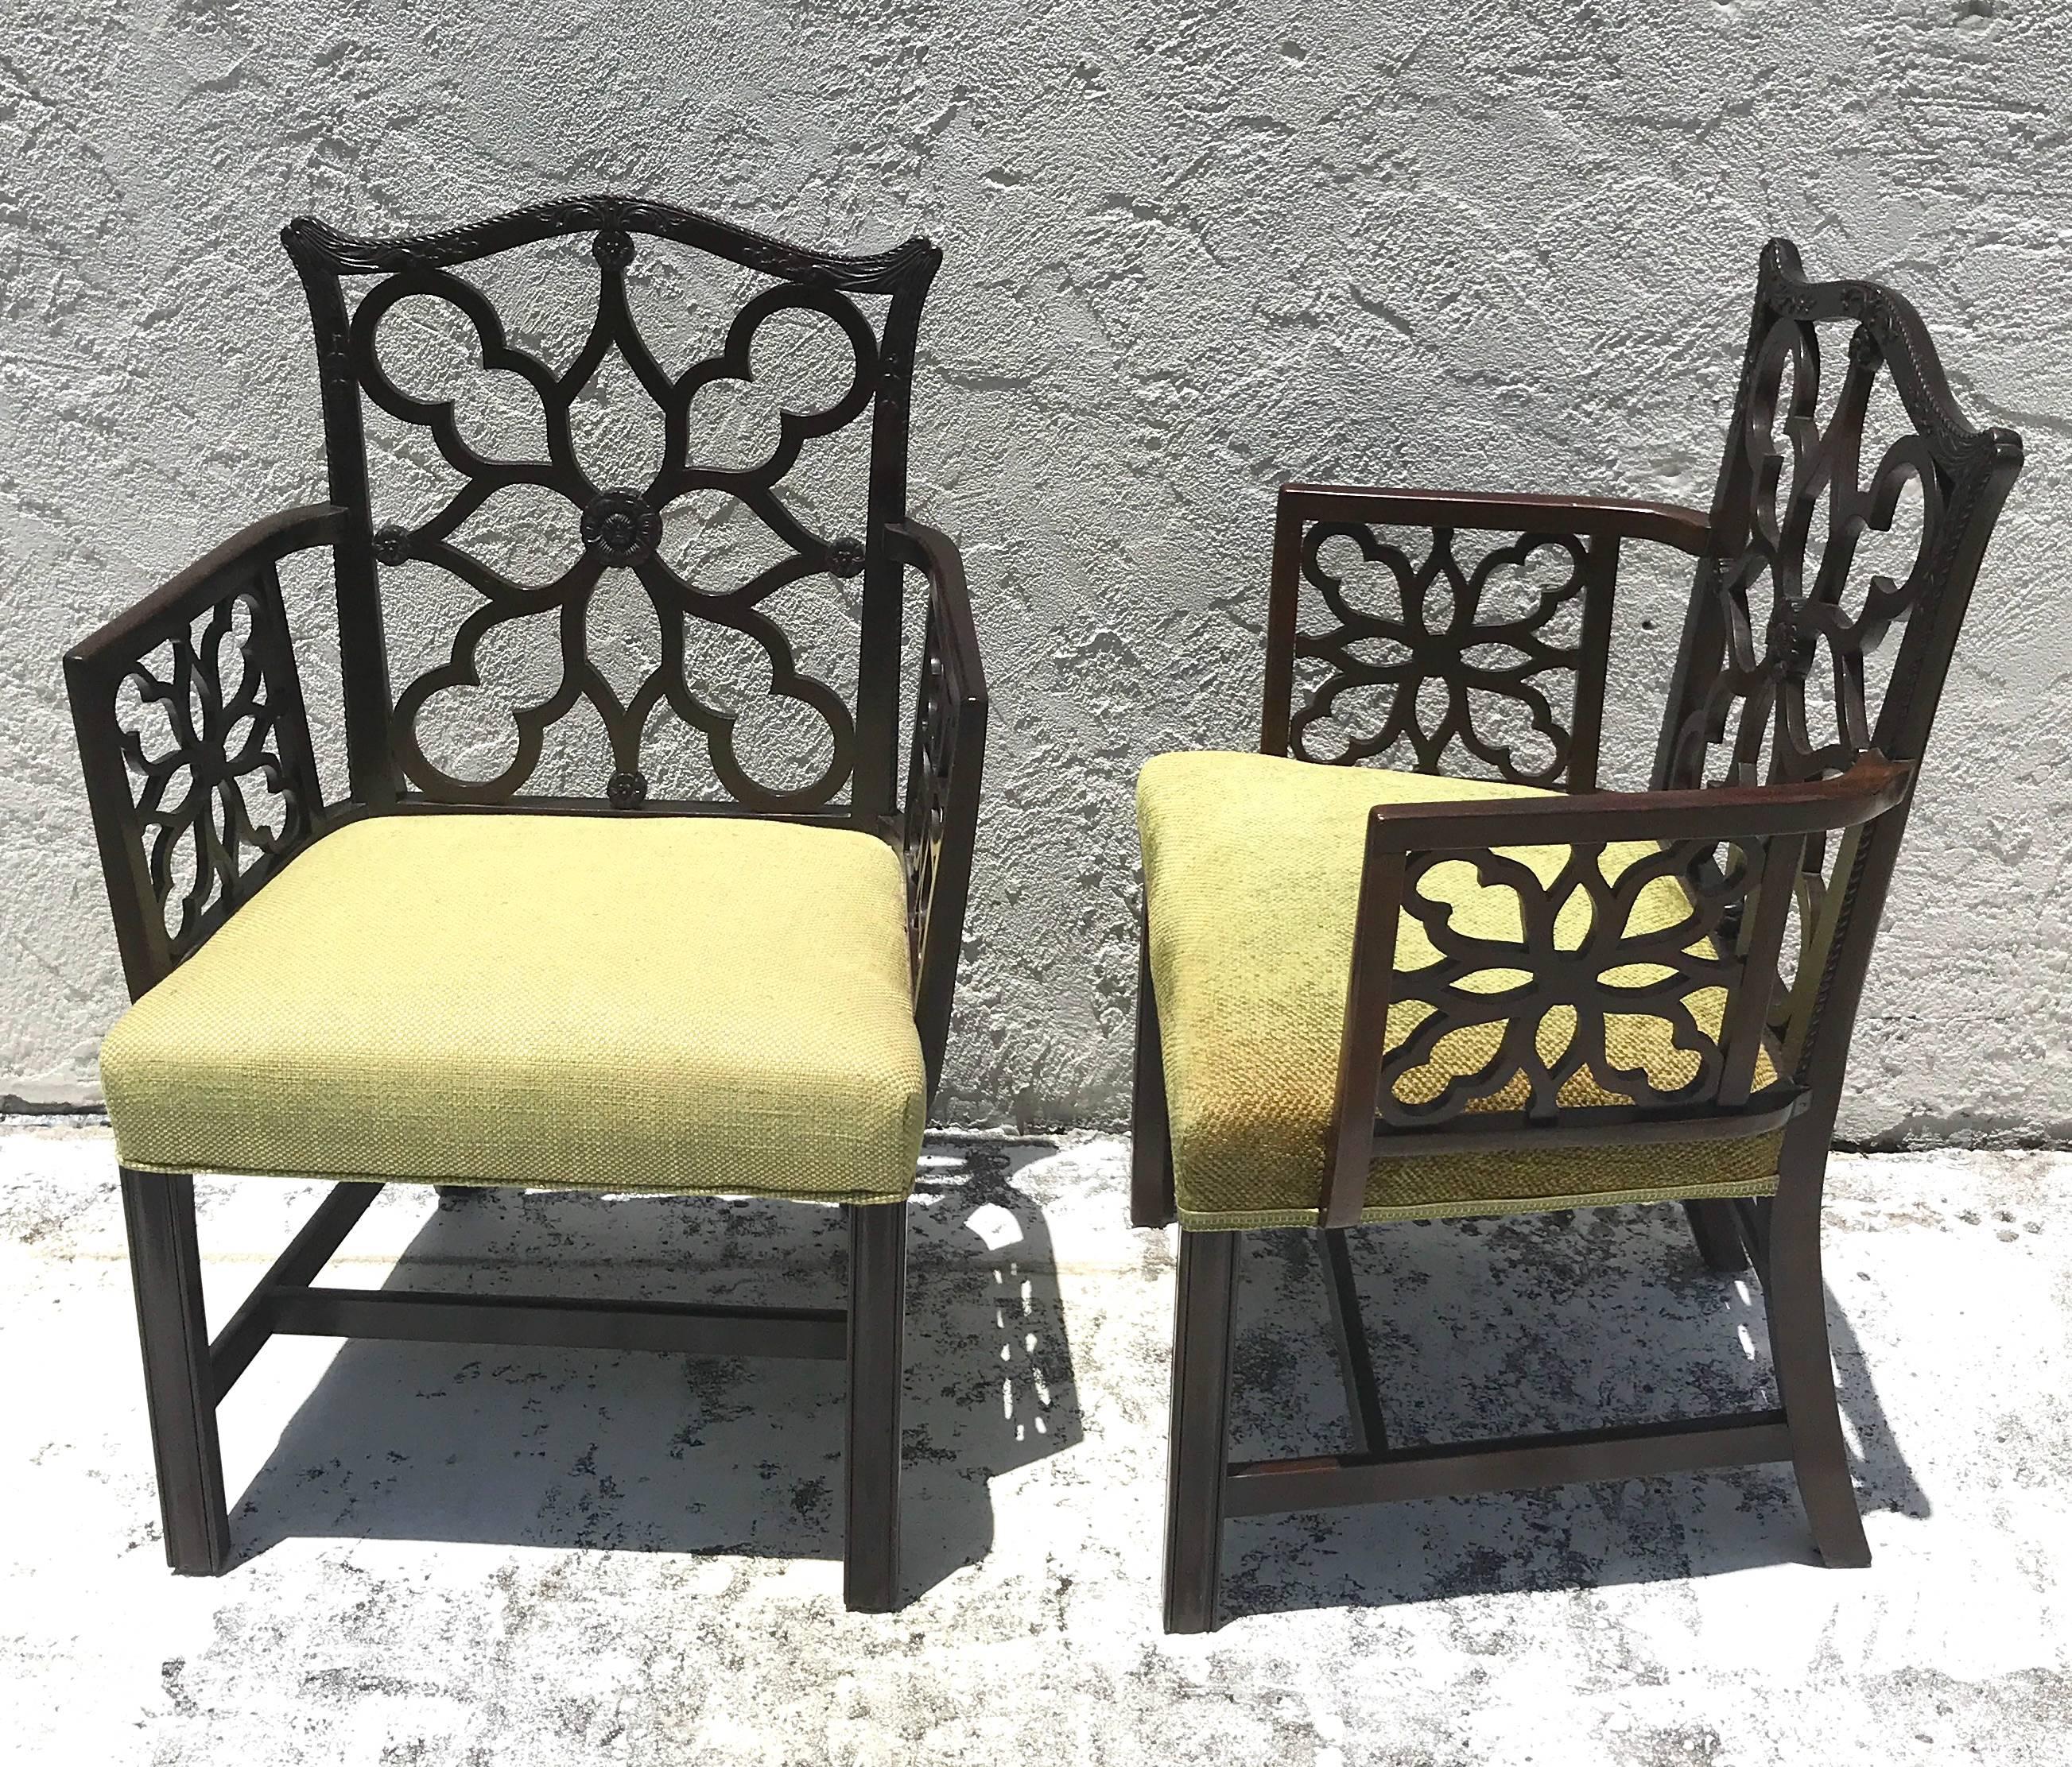 Pair of Georgian style Lattice armchairs, finely carved mahogany pierced frames,
One slightly larger, both with slightly different colored vintage upholstery.
Measures: Larger armchair is 37